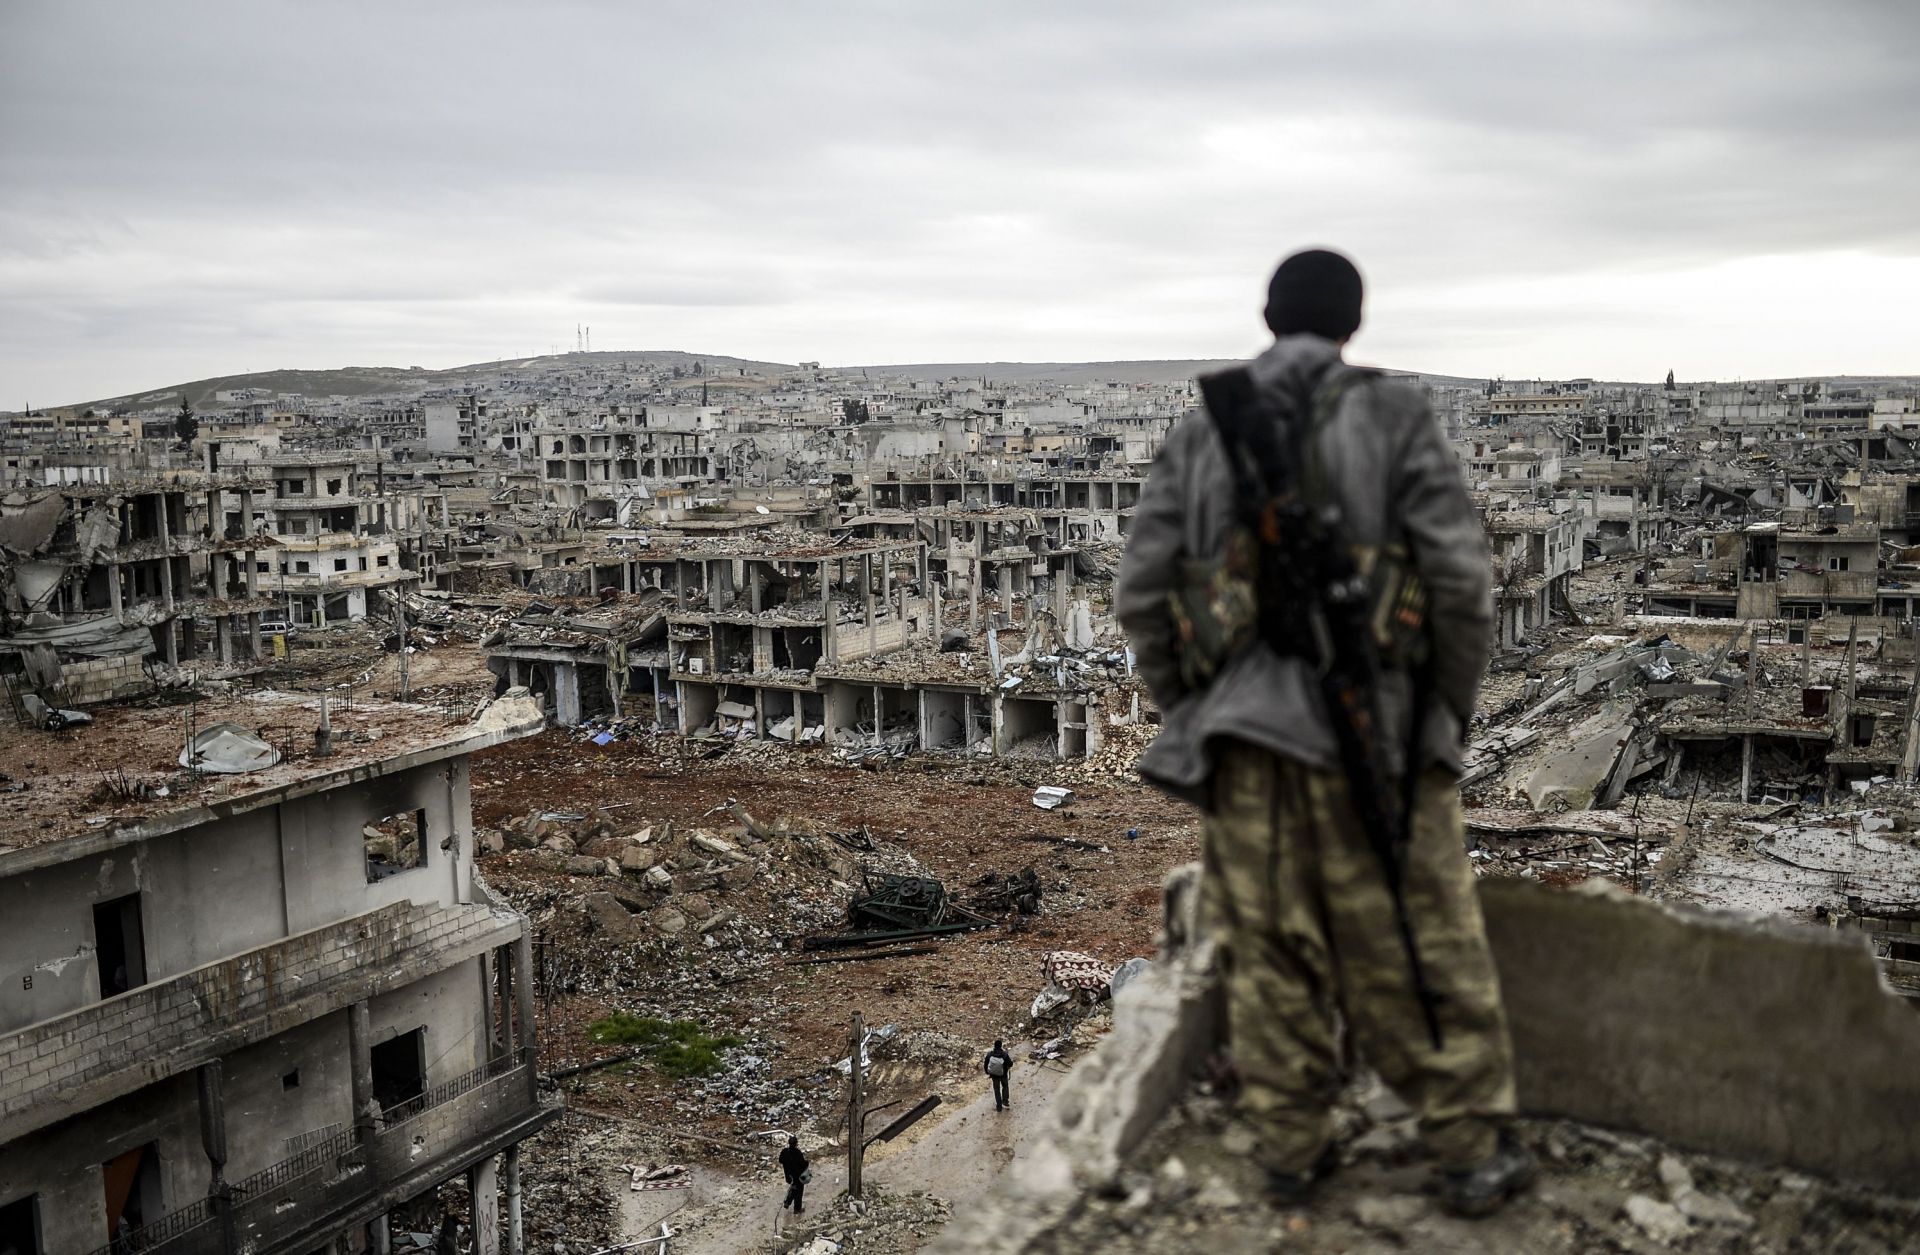 A man stands on top of a building overlooking the destryoed town of Kobane, Syria.